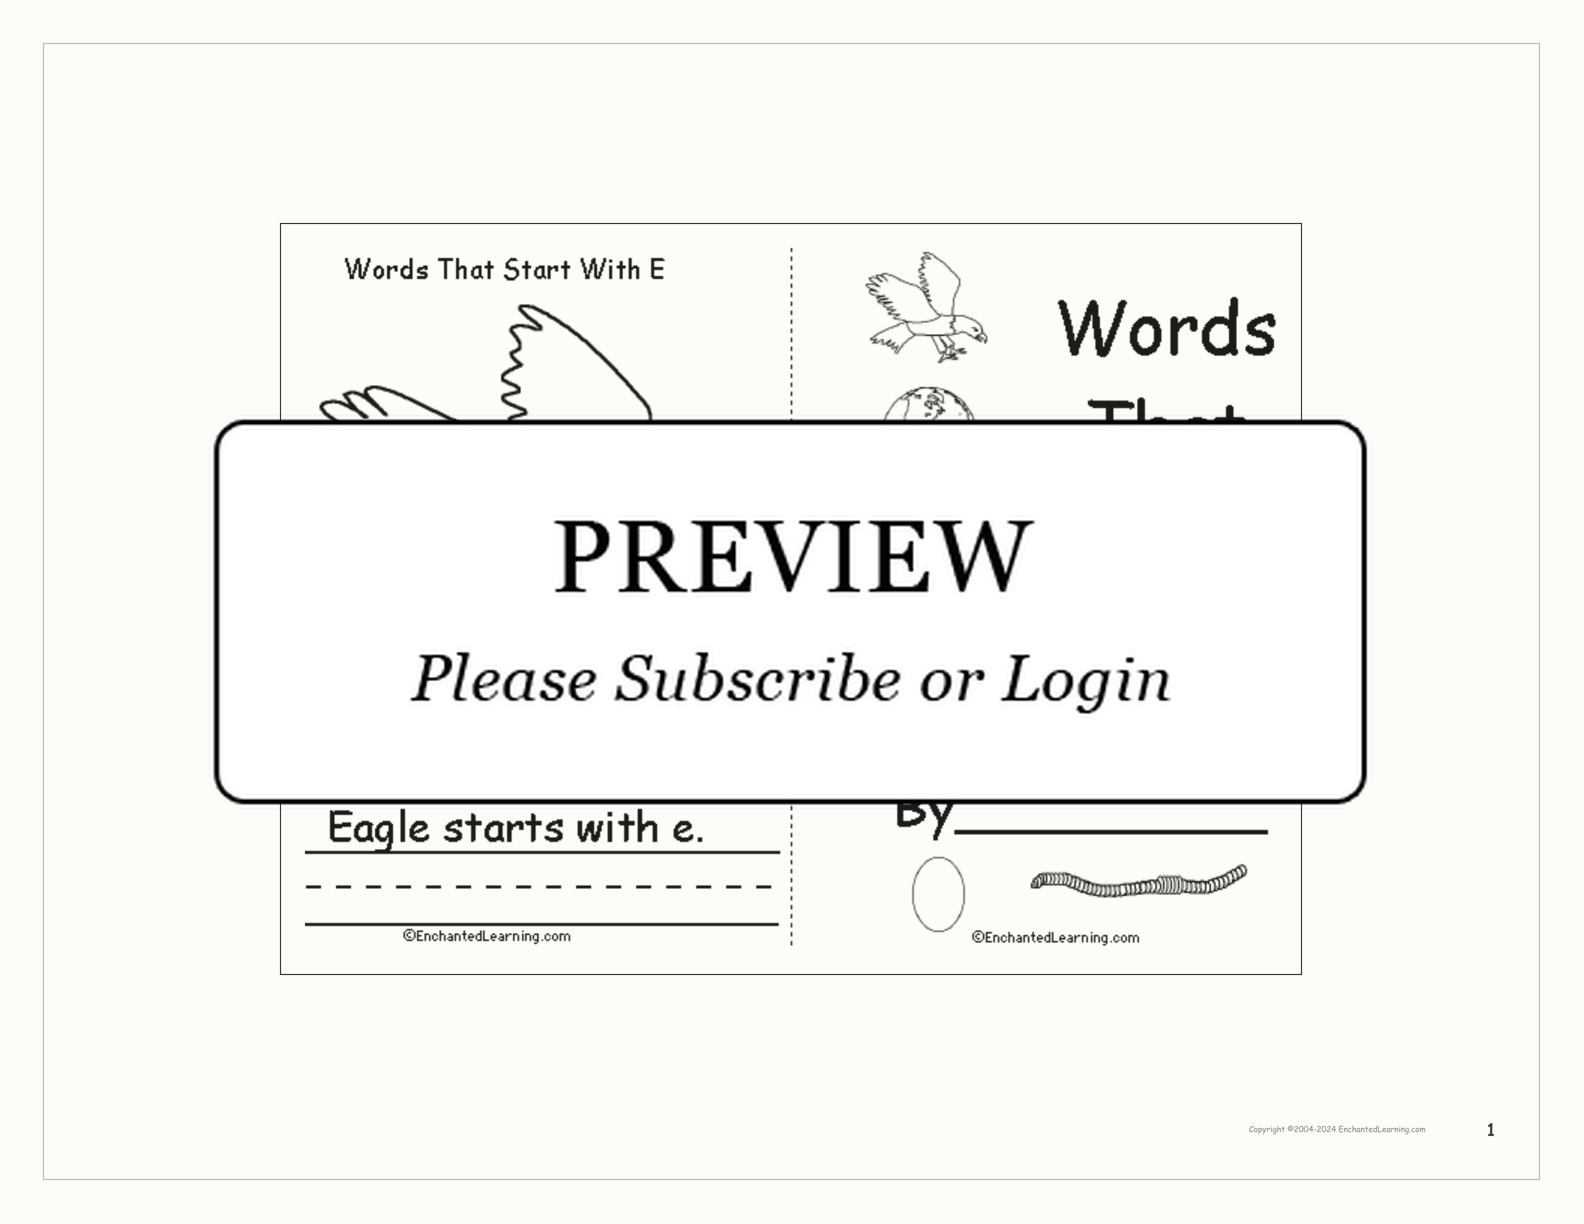 Words That Start With E interactive printout page 1